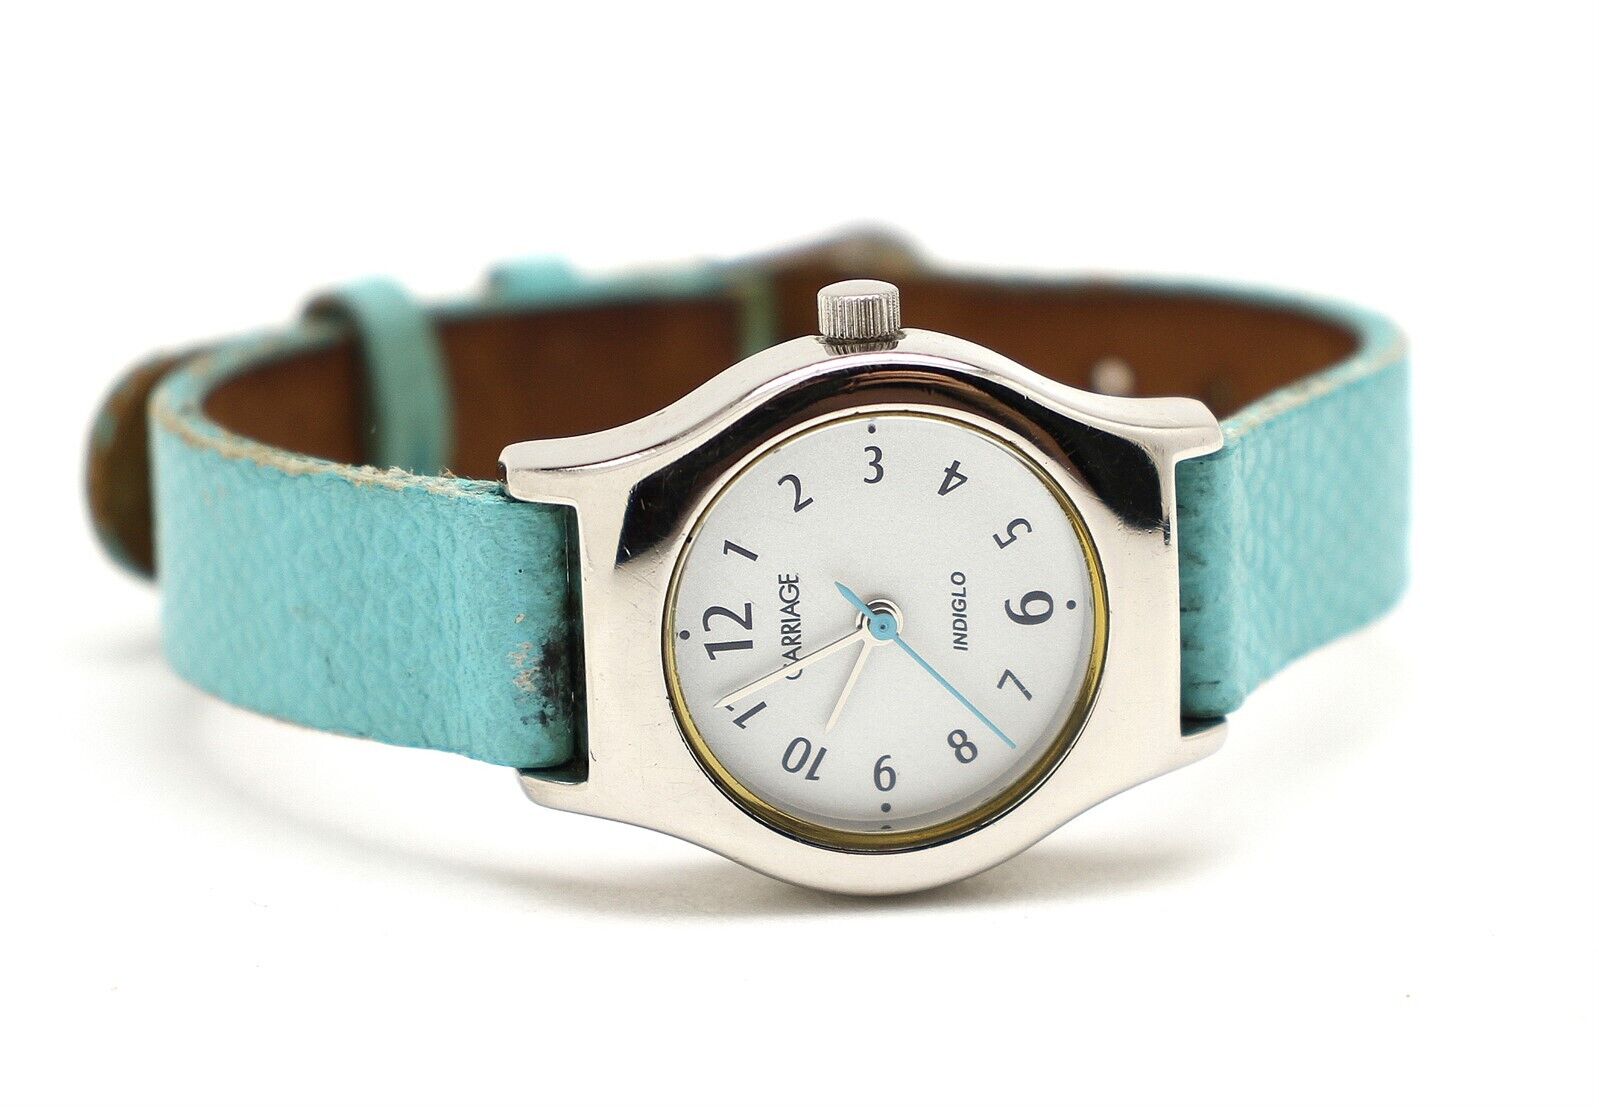 CARRIAGE WATCH BY TIMEX | Timex, Bracelet watch, Accessories watches